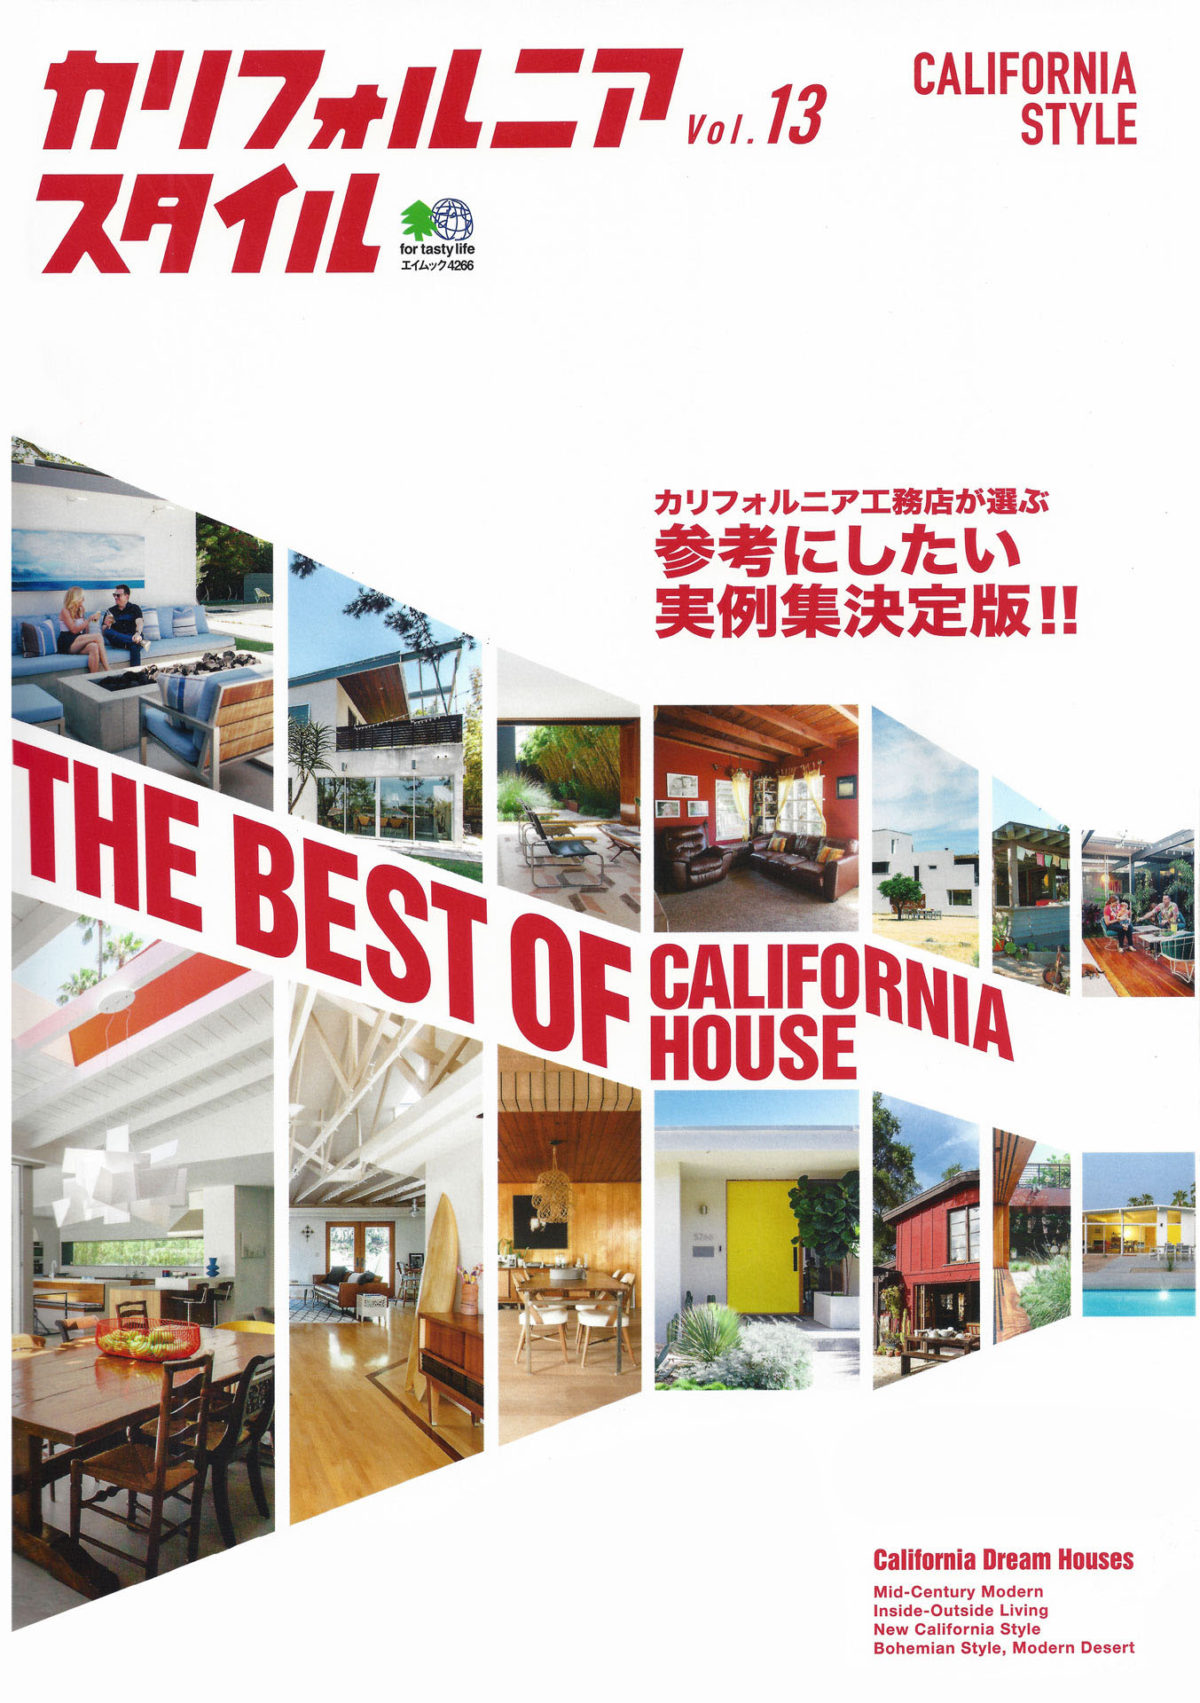 Ranch Redux is a ‘Best of California House’ in California Style Vol.13